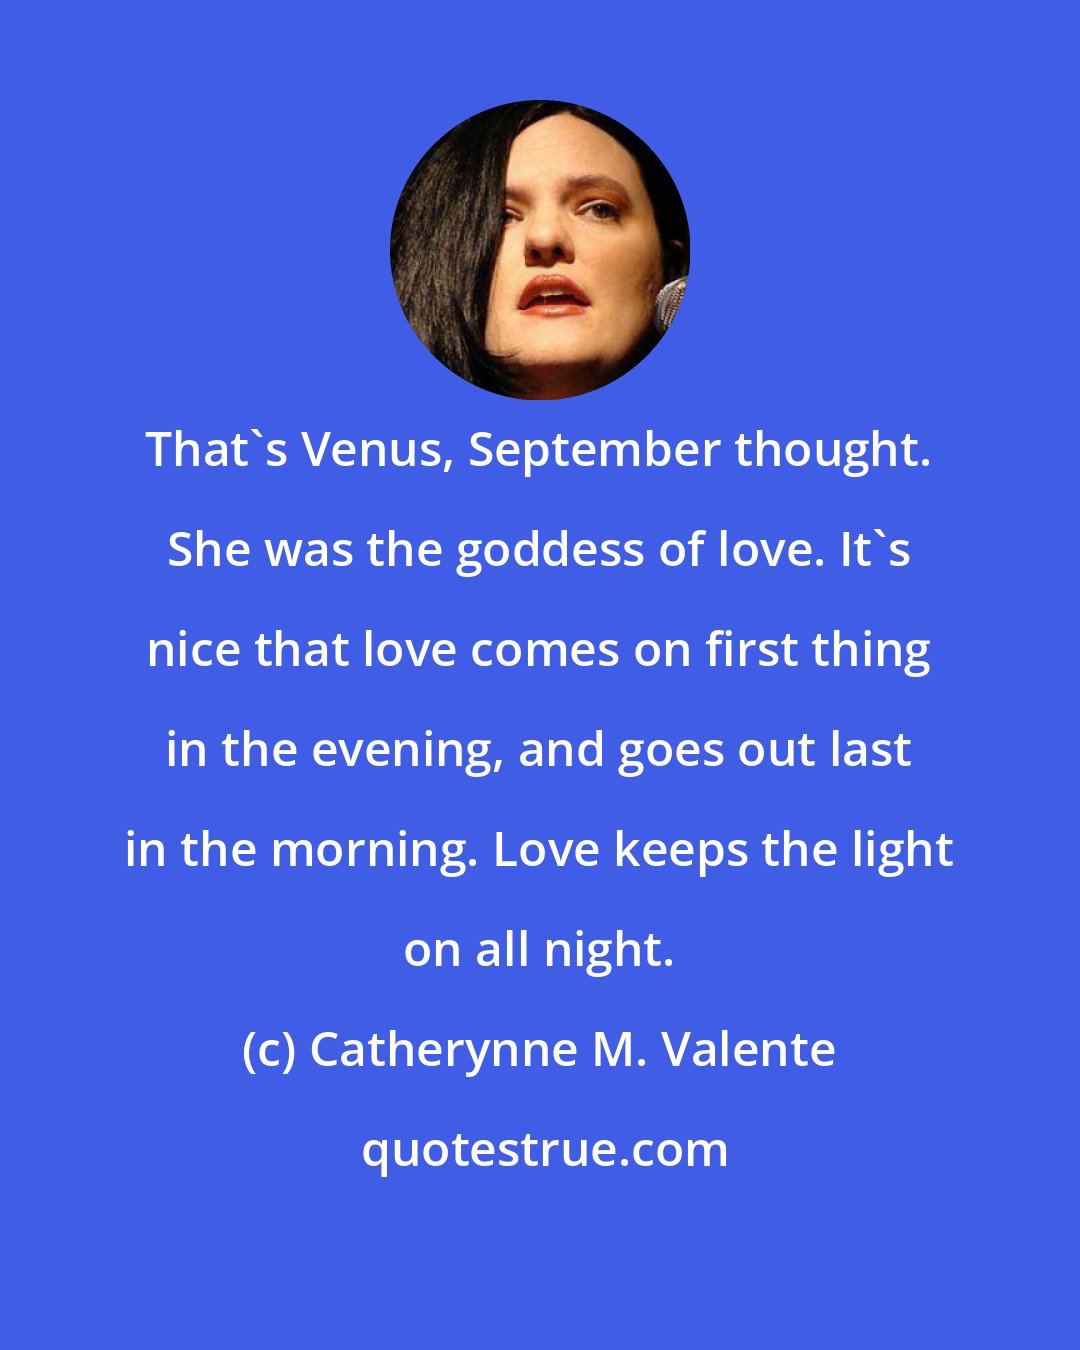 Catherynne M. Valente: That's Venus, September thought. She was the goddess of love. It's nice that love comes on first thing in the evening, and goes out last in the morning. Love keeps the light on all night.